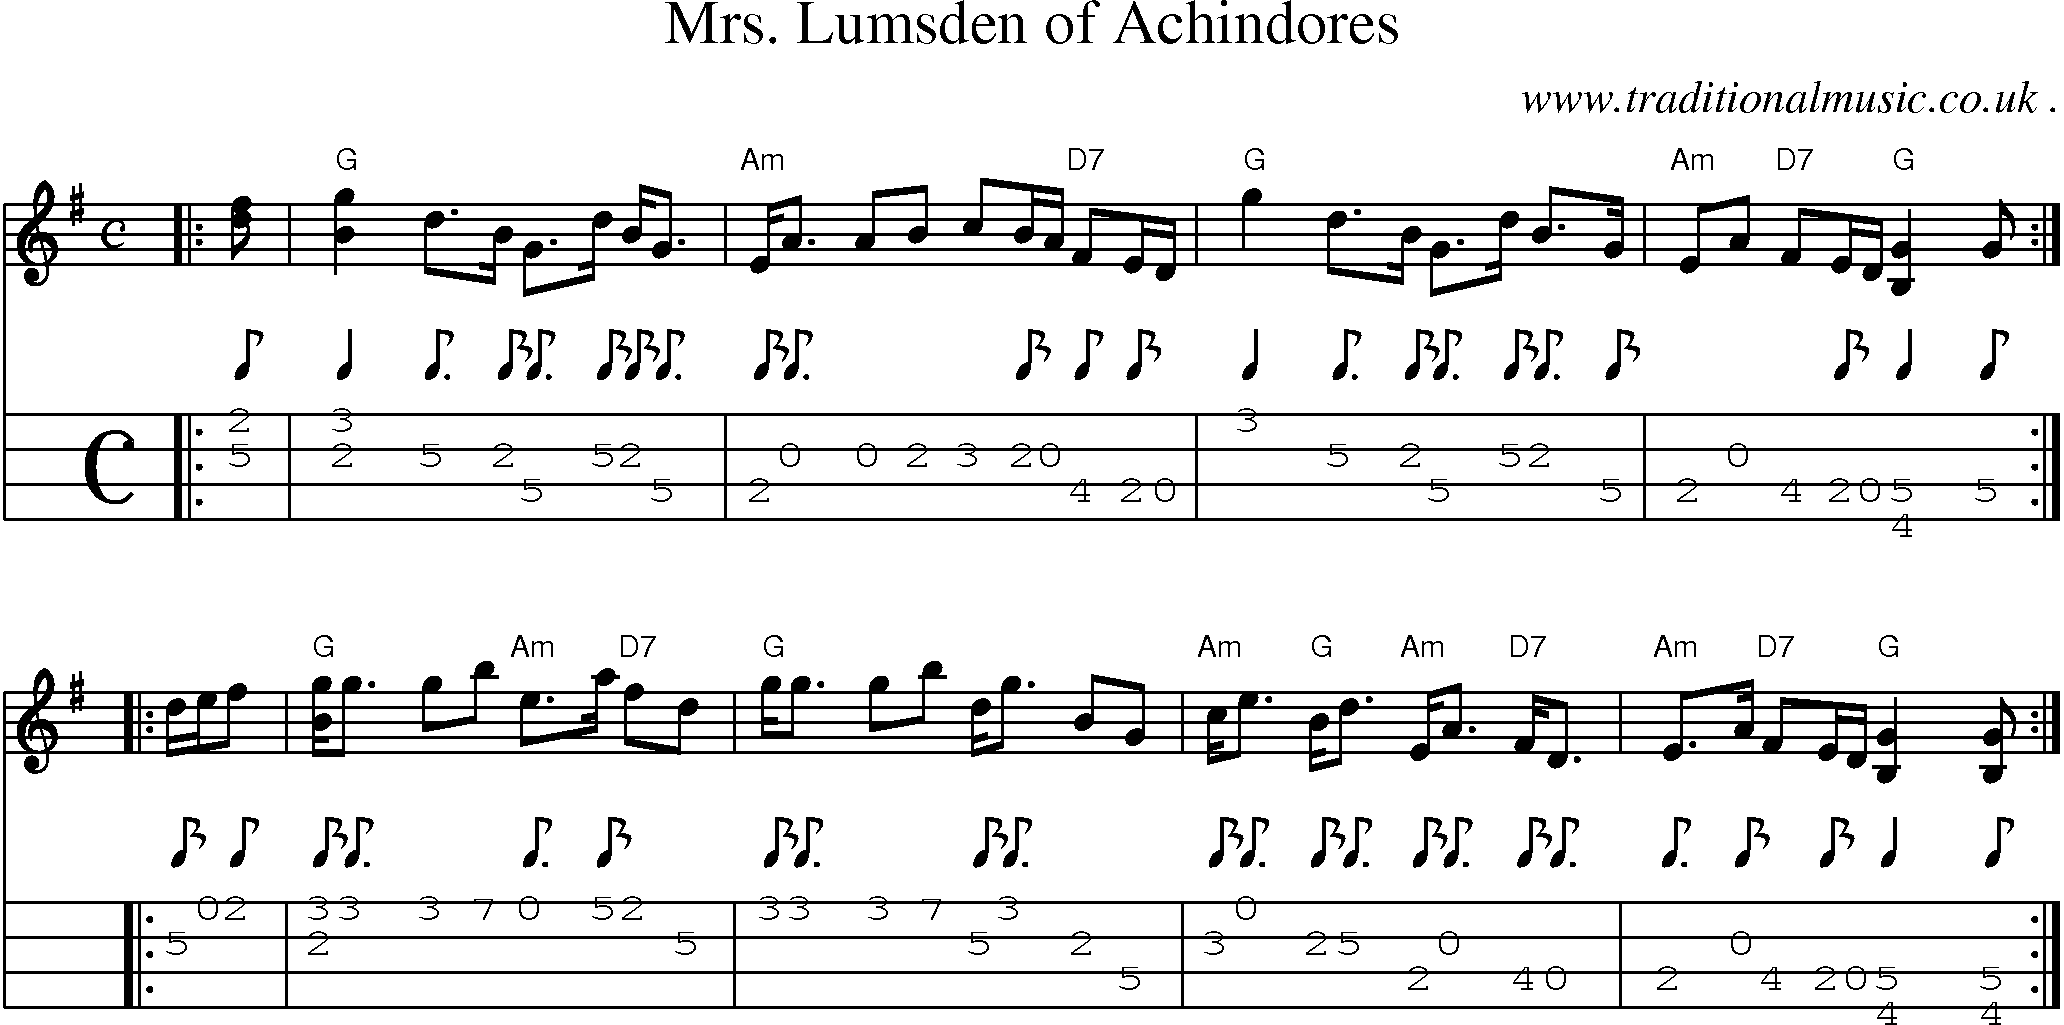 Sheet-music  score, Chords and Mandolin Tabs for Mrs Lumsden Of Achindores